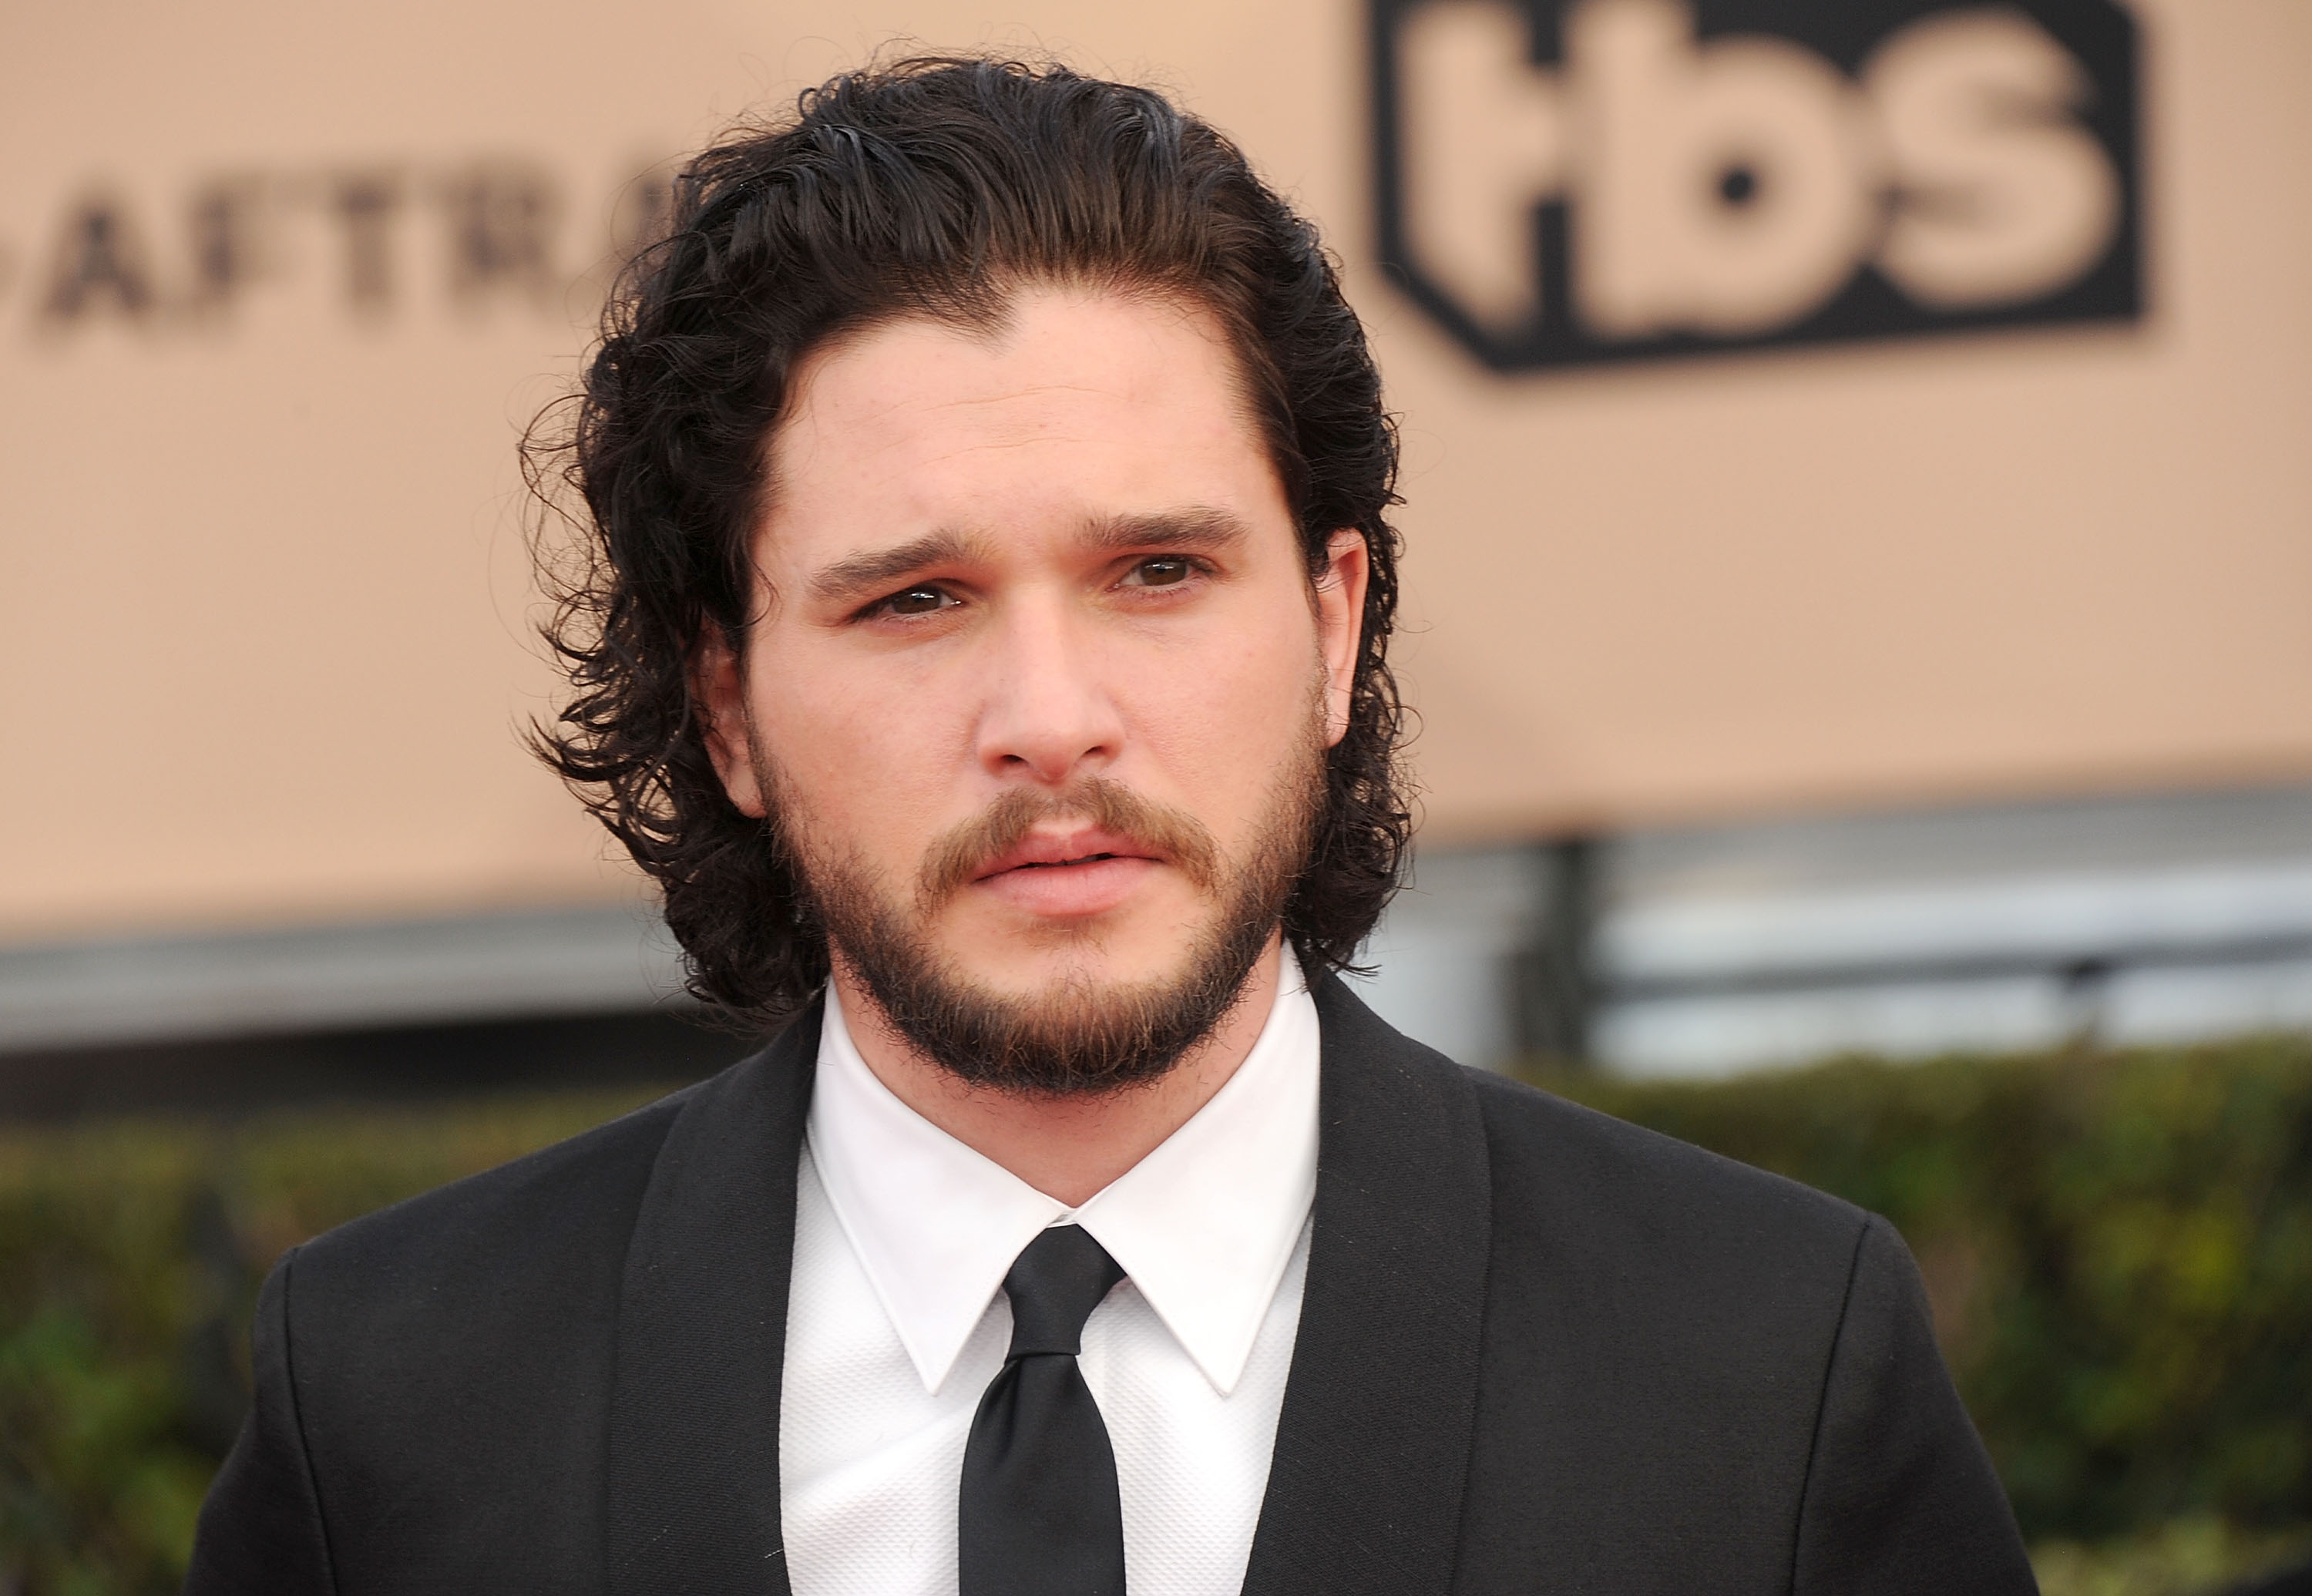 Actor Kit Harington arrives at the 22nd Annual Screen Actors Guild Awards at The Shrine Auditorium on January 30, 2016 in Los Angeles, California. (Gregg DeGuire&mdash;Getty Images)